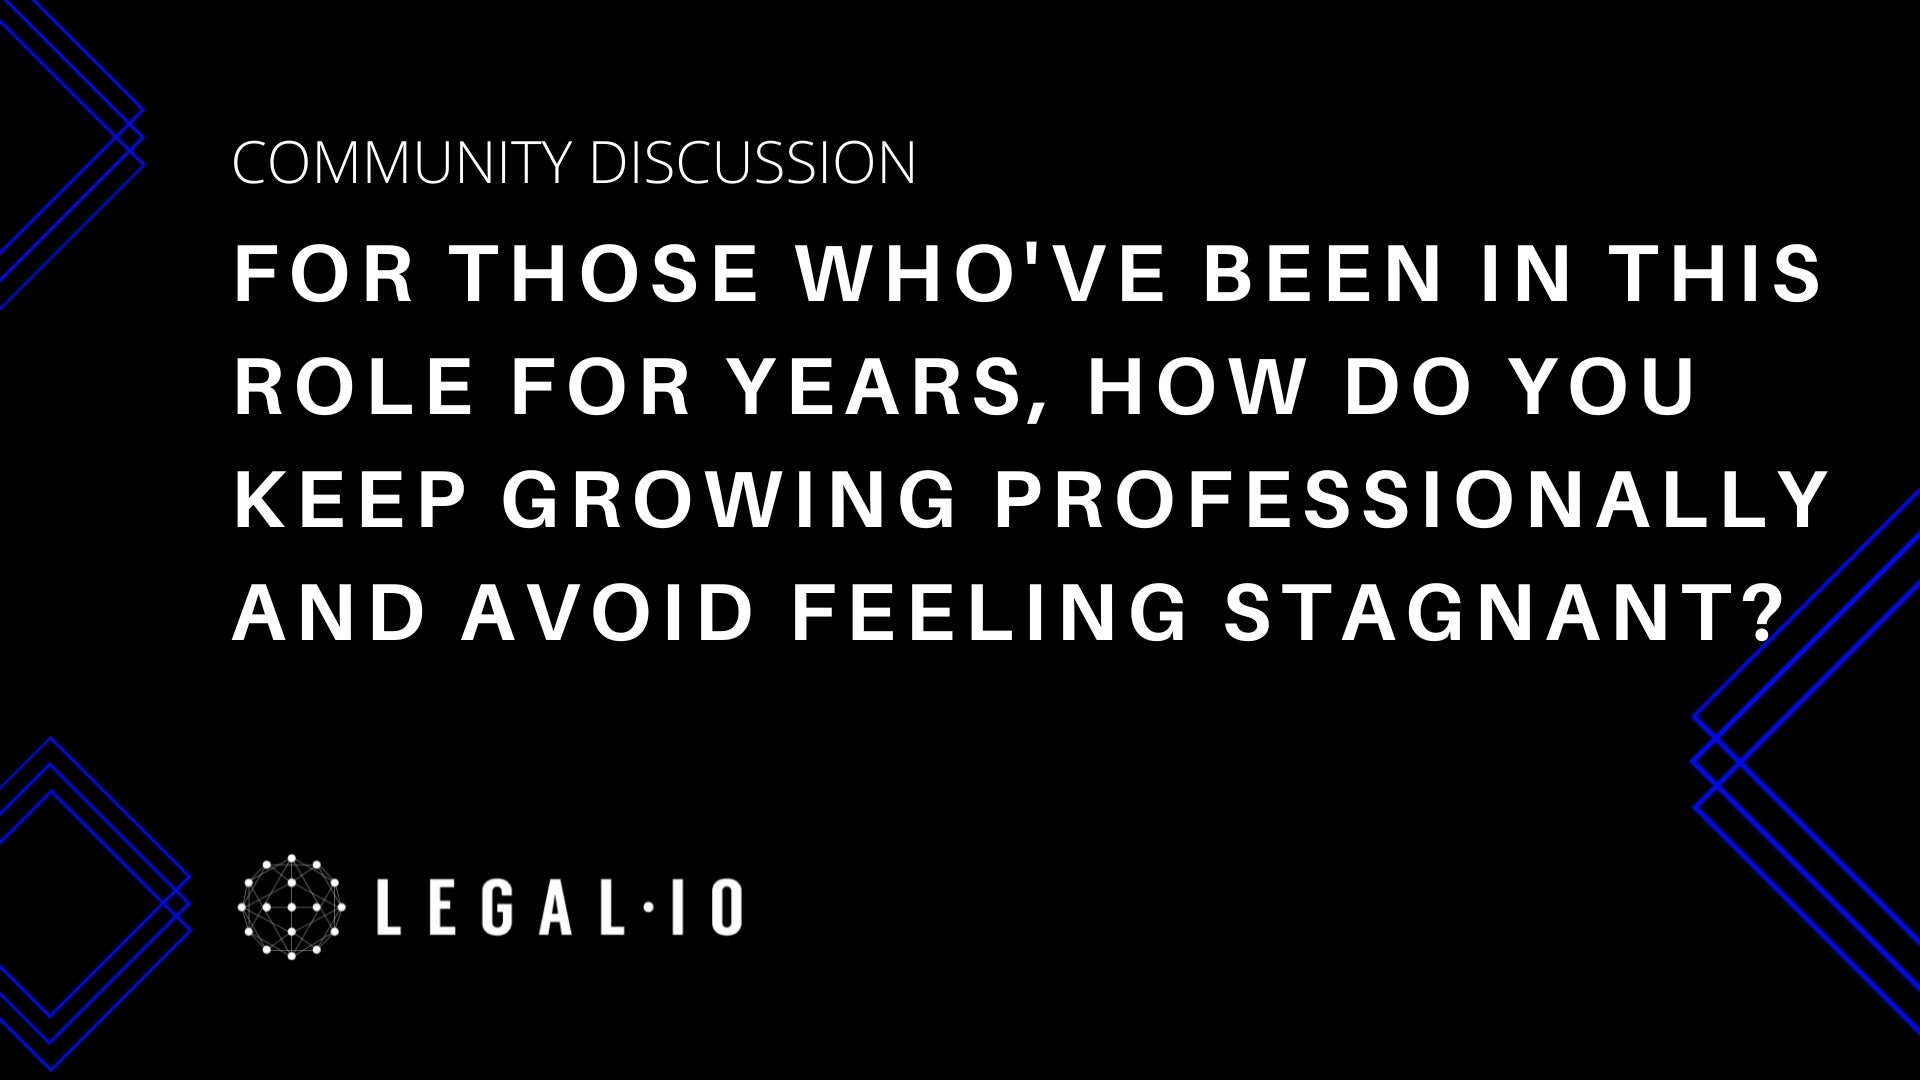 Community Discussion: For those who've been in this role for years, how do you keep growing professionally and avoid feeling stagnant?